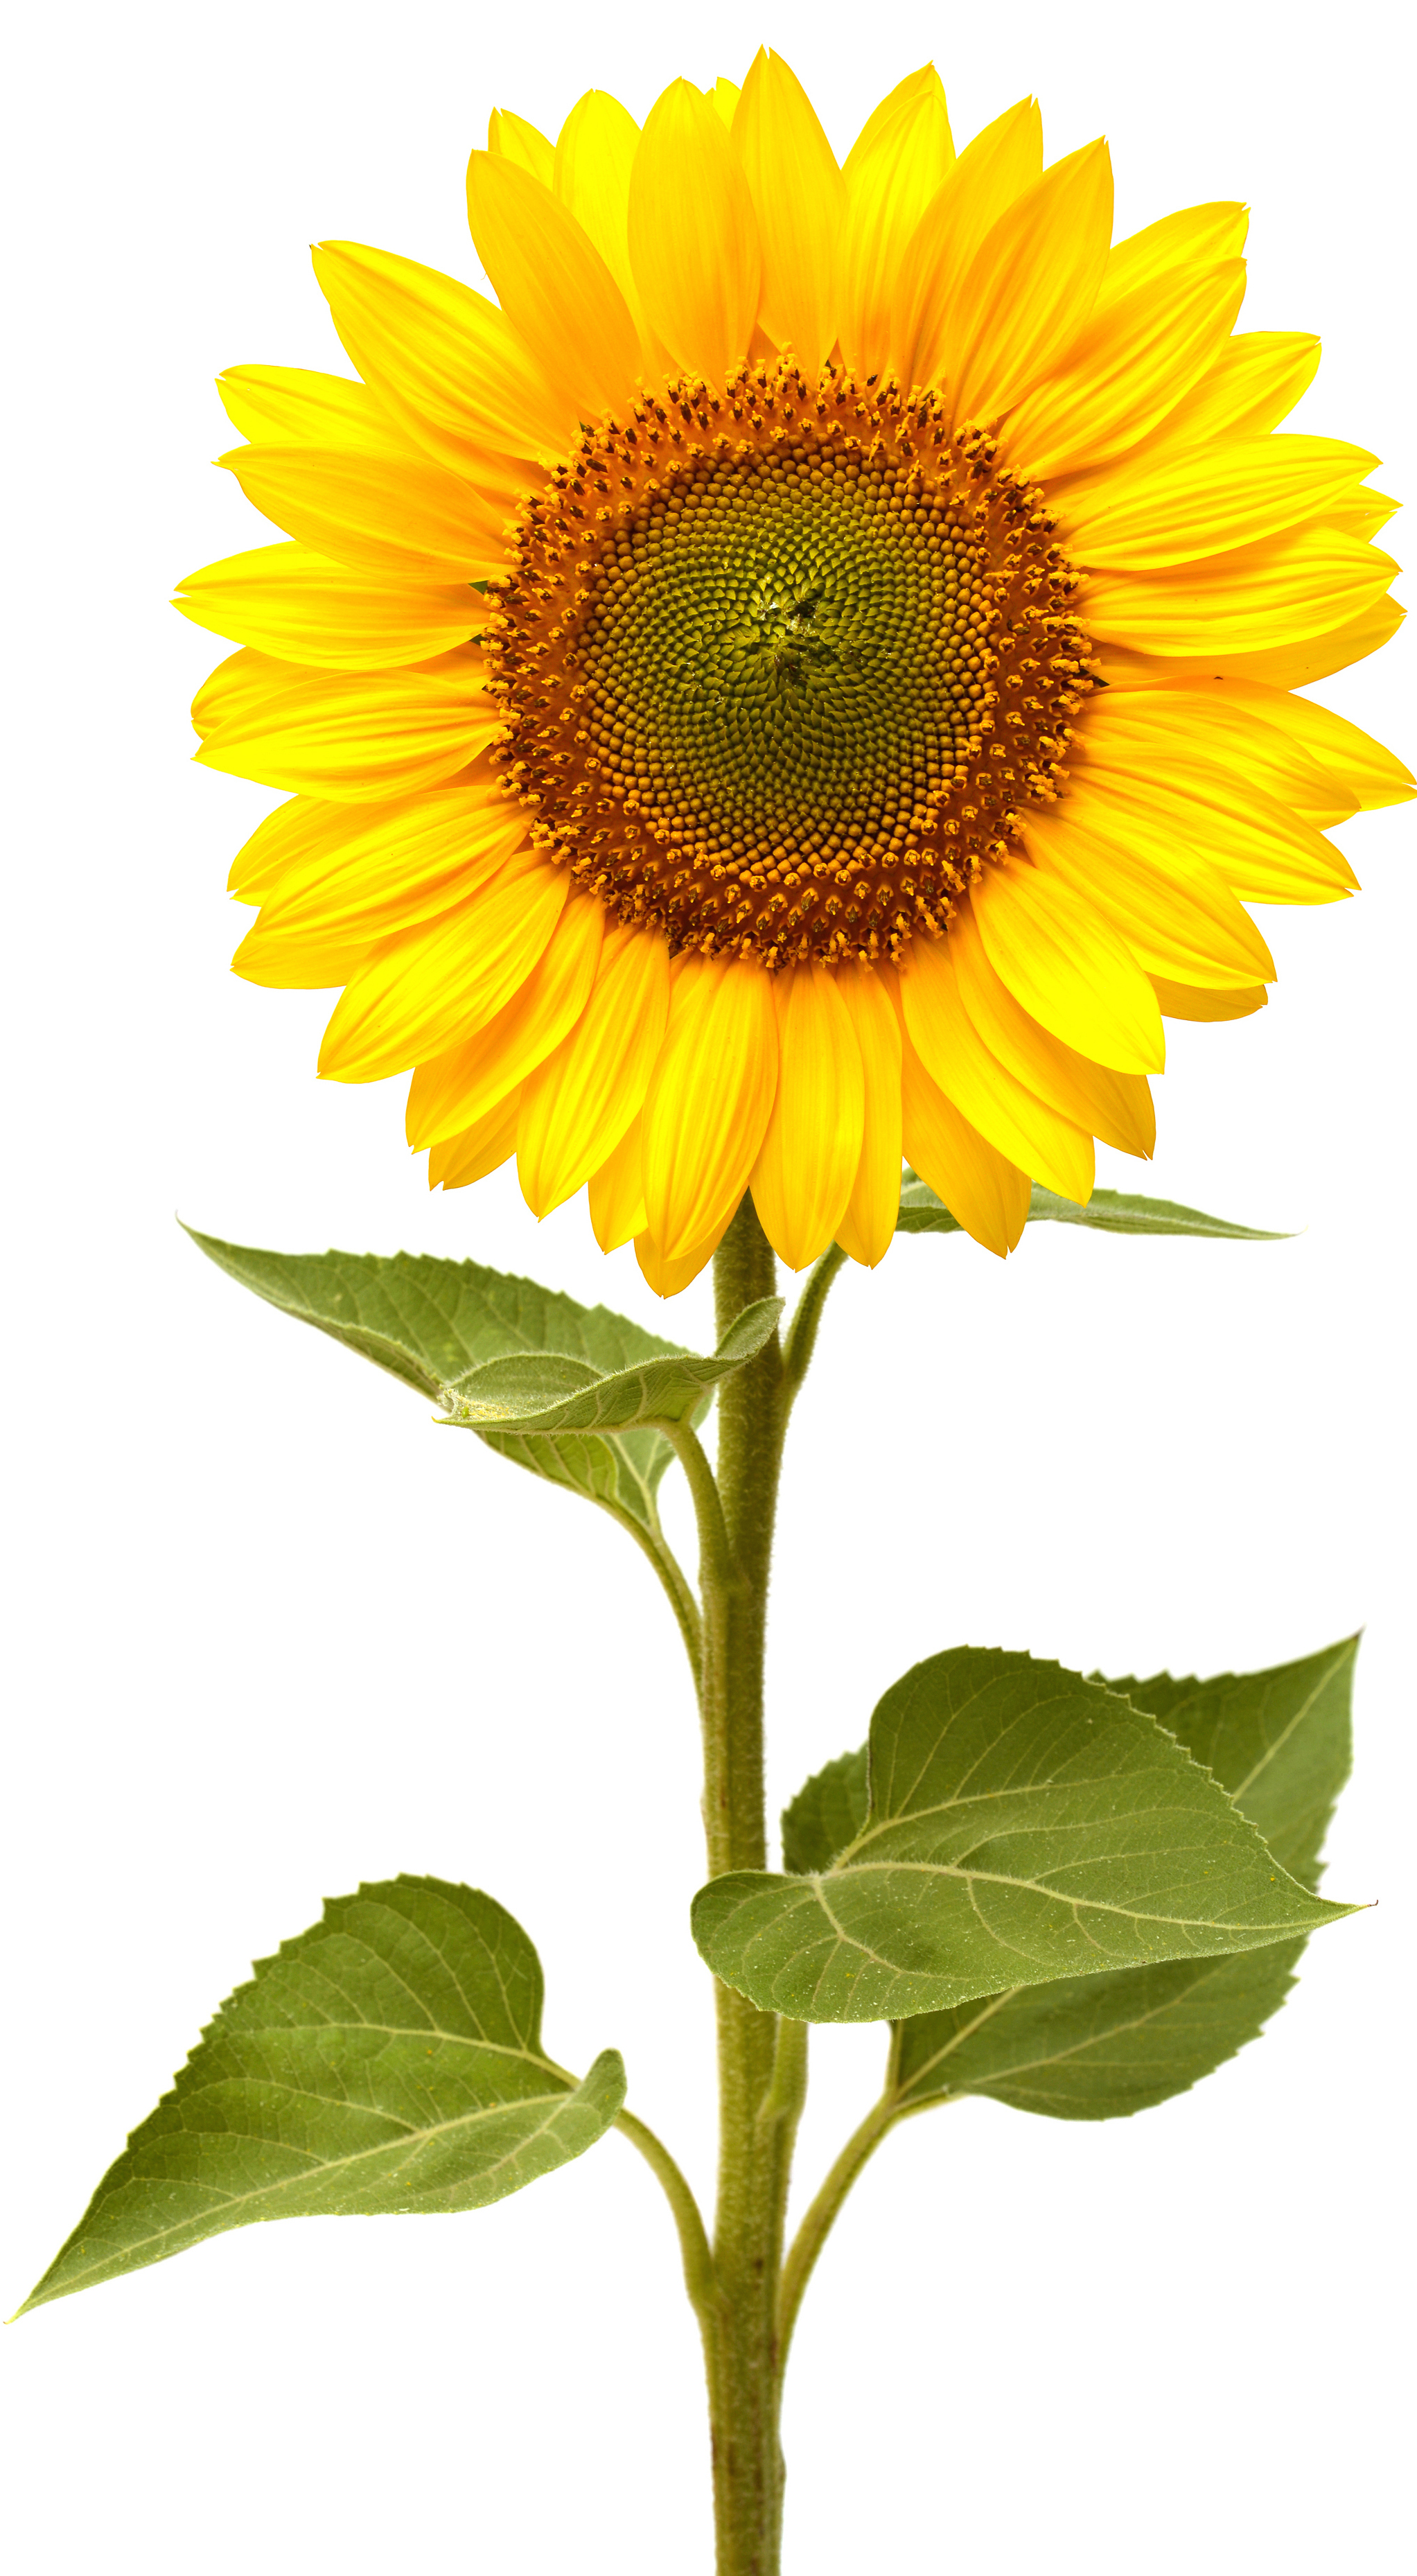 HQ Sunflower Wallpapers | File 7227.44Kb